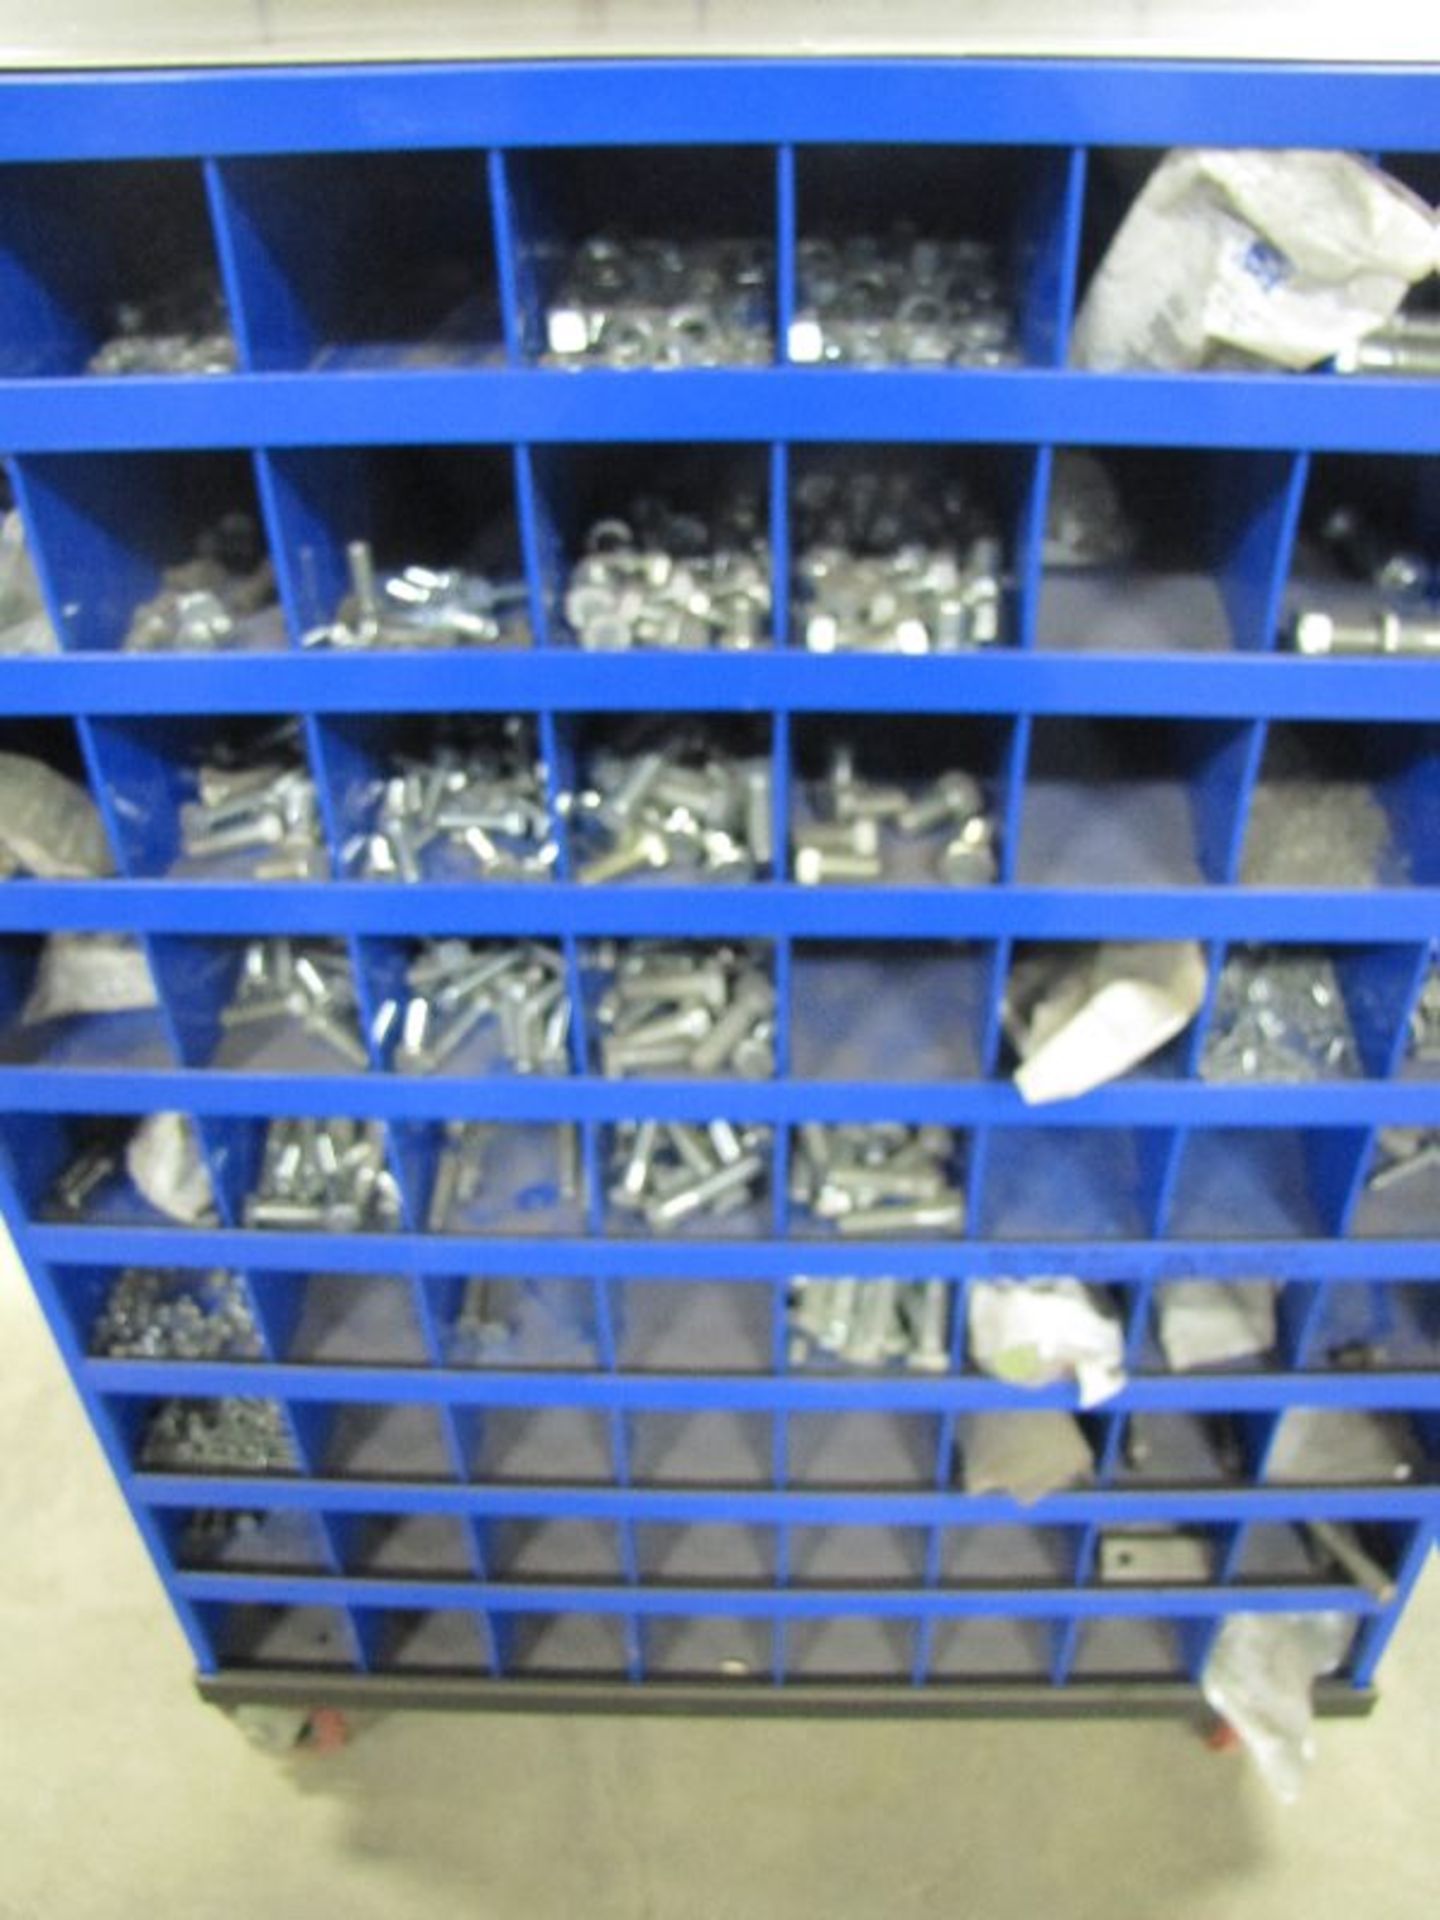 Fastenal Portable Rolling Bin with Split Washers, Flat Washers, Nuts and Bolts as Shown - Image 3 of 4